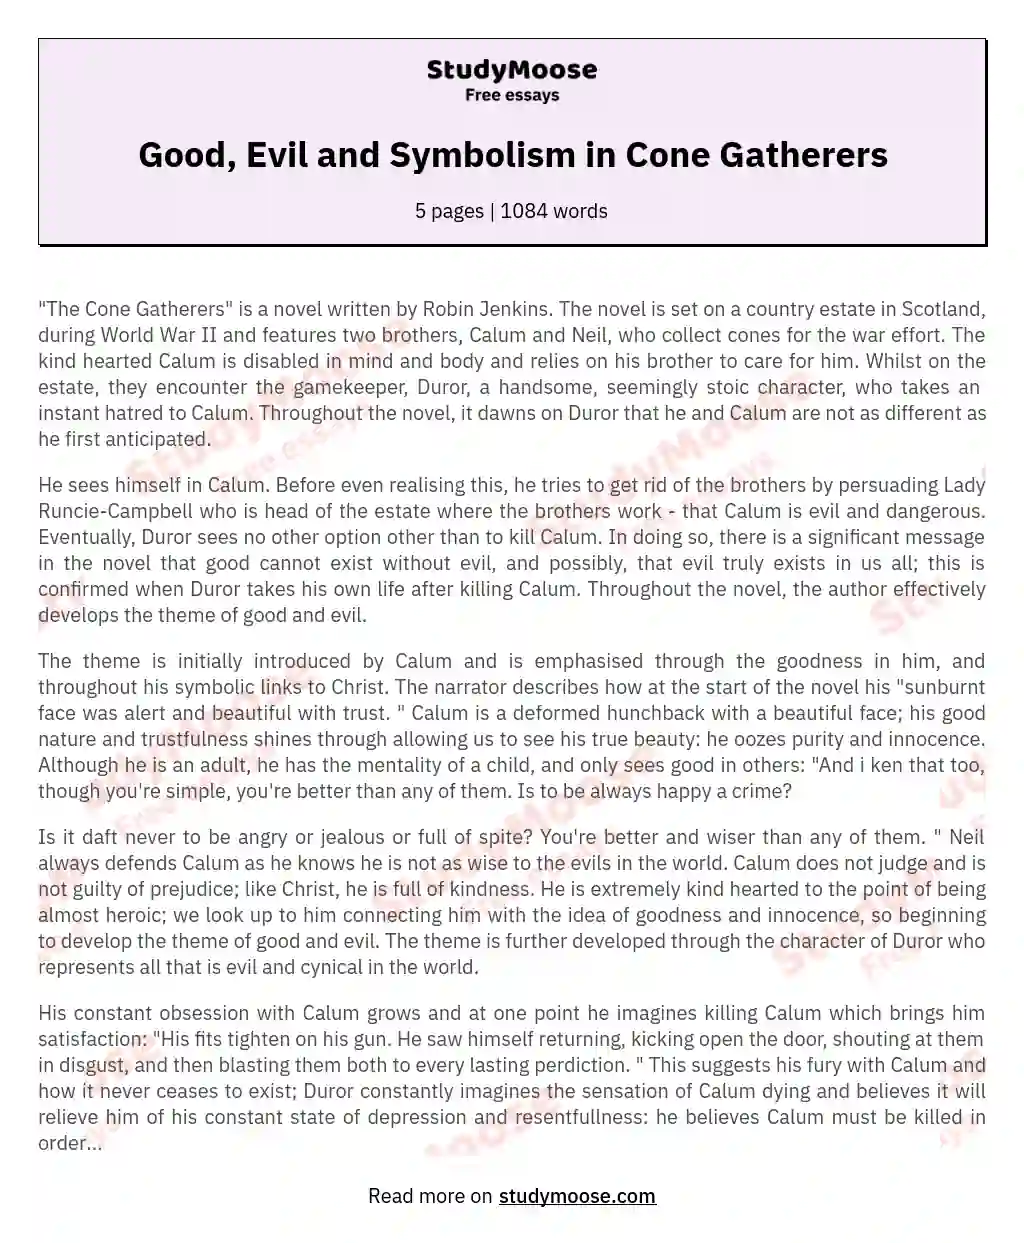 Good, Evil and Symbolism in Cone Gatherers essay